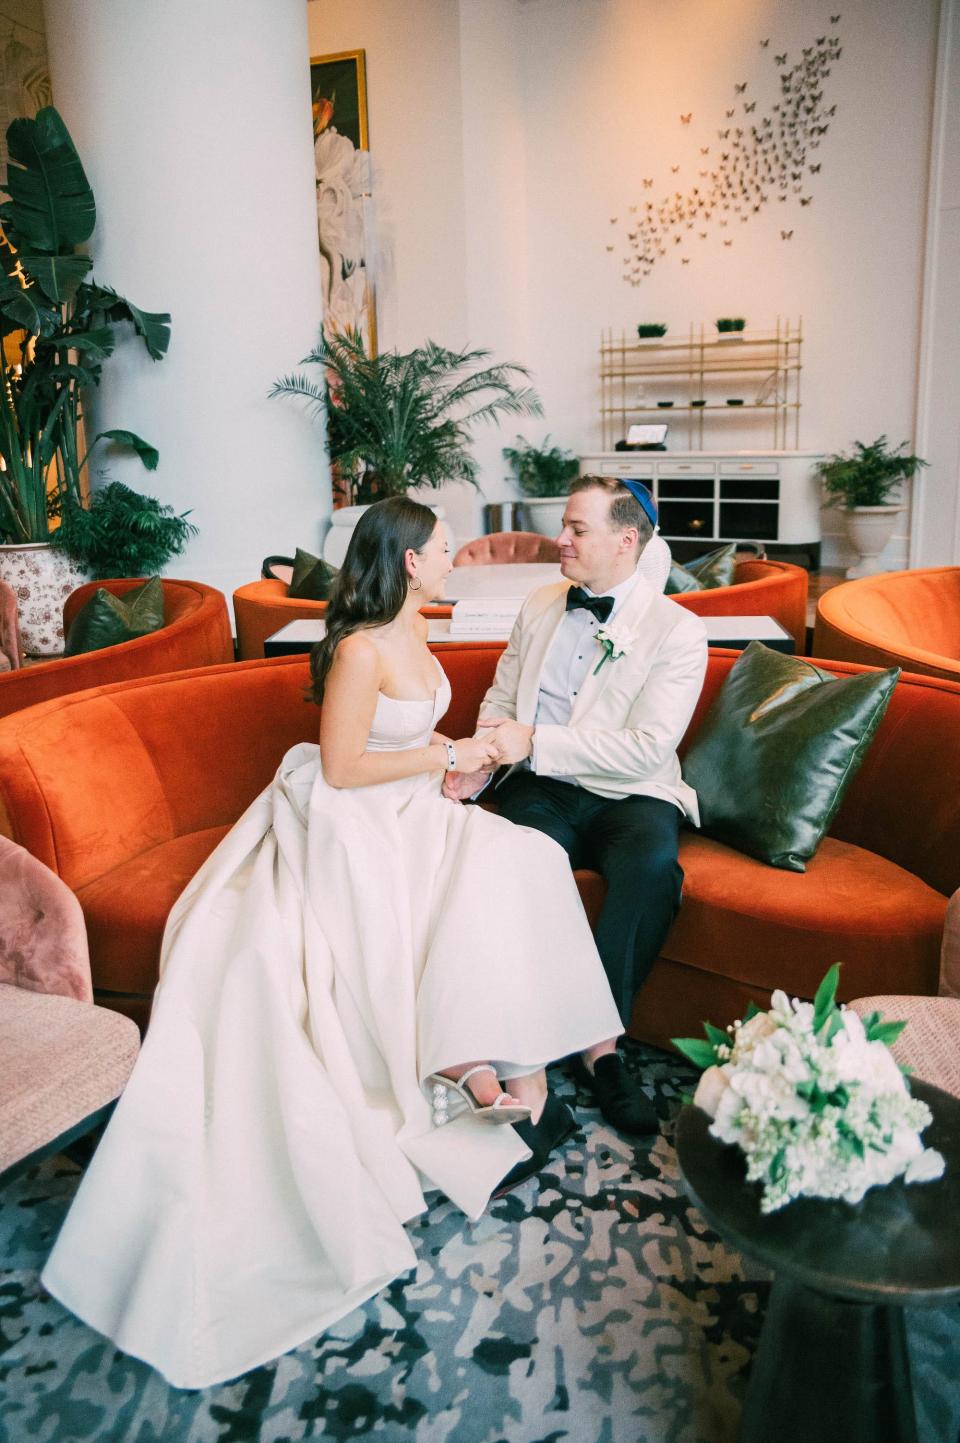 A bride and groom hold hands and look at each other on a couch.